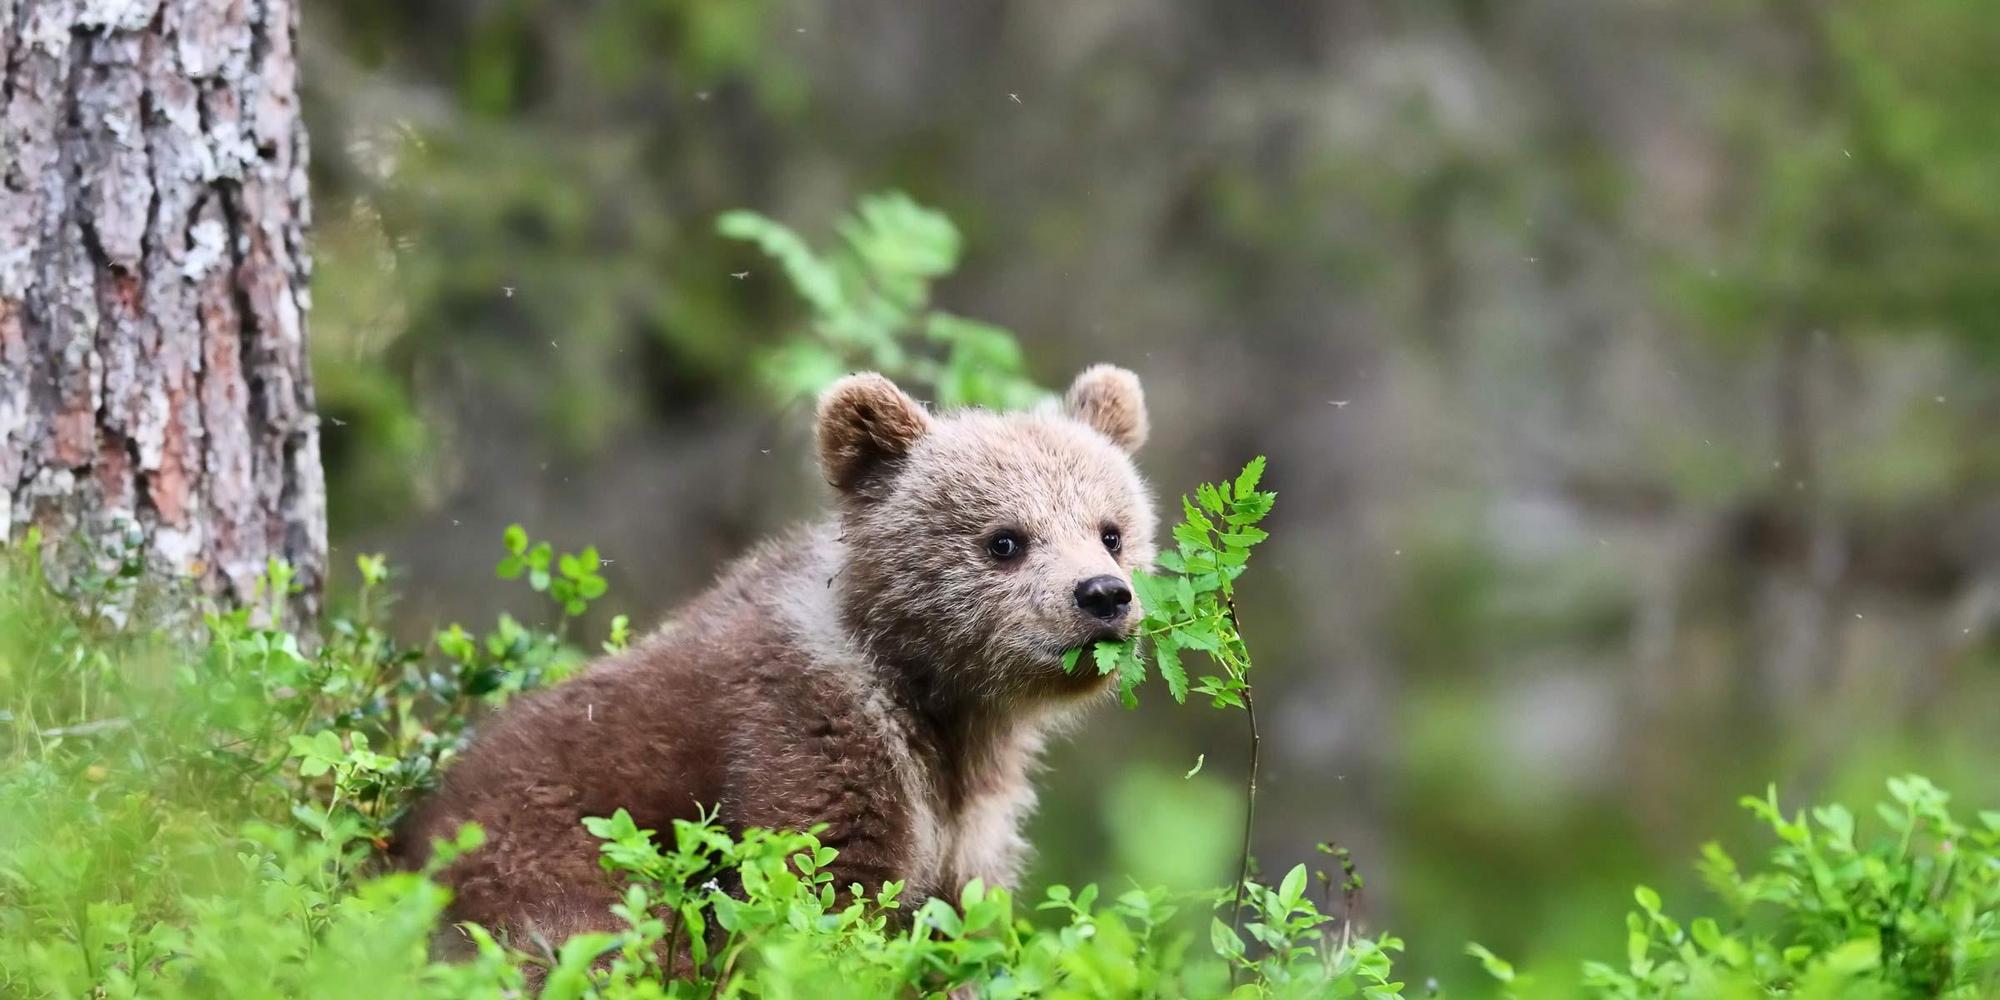 A bear cub sits in the undergrowth and eats leaves.